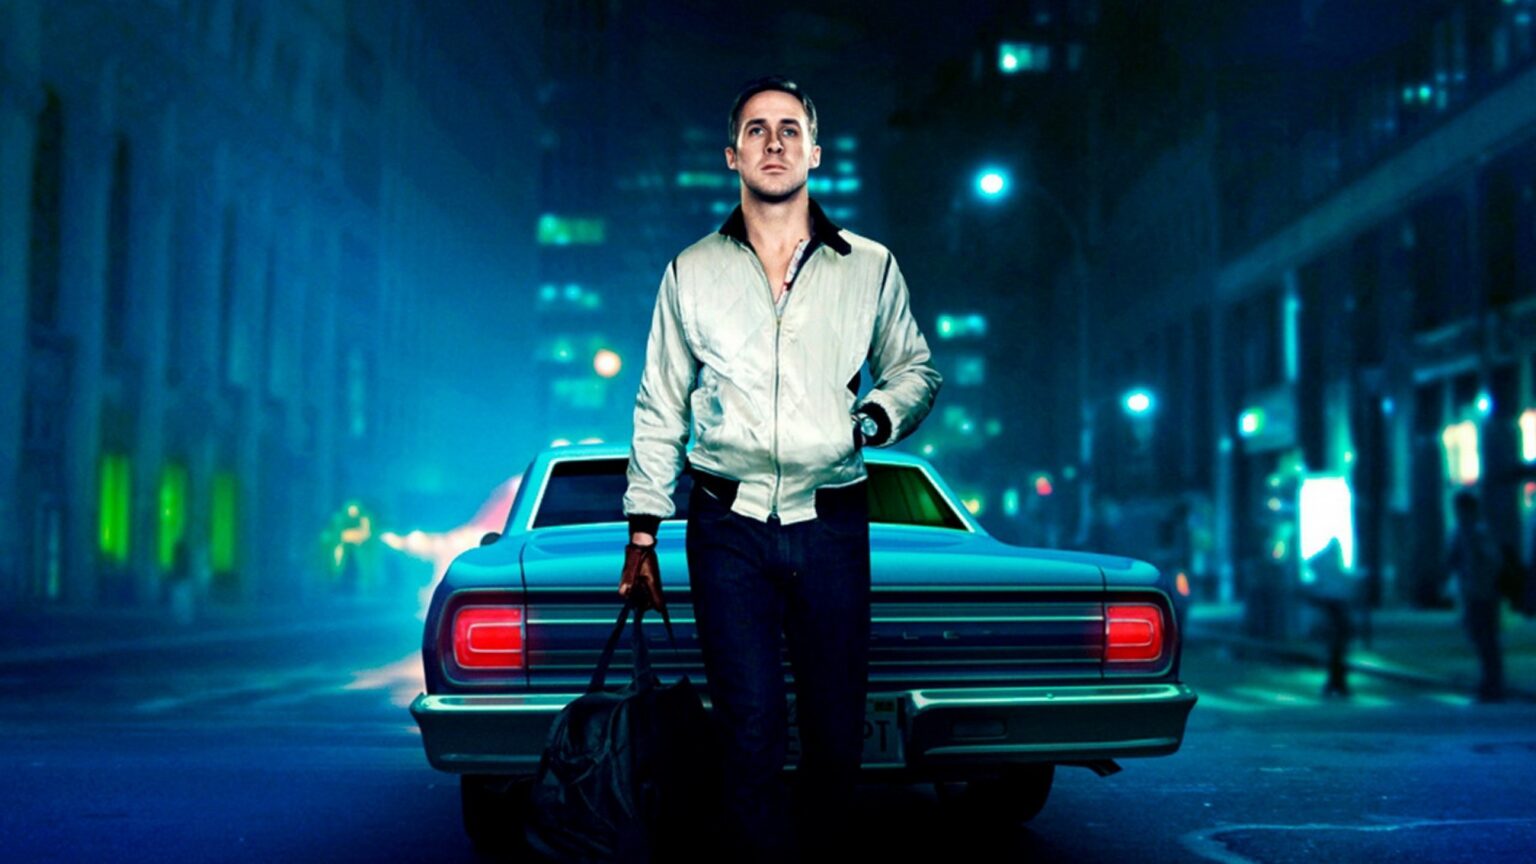 'Drive' is a classic film directed by Nicolas Winding Refn and starring Ryan Gosling. Check out our movie review here.